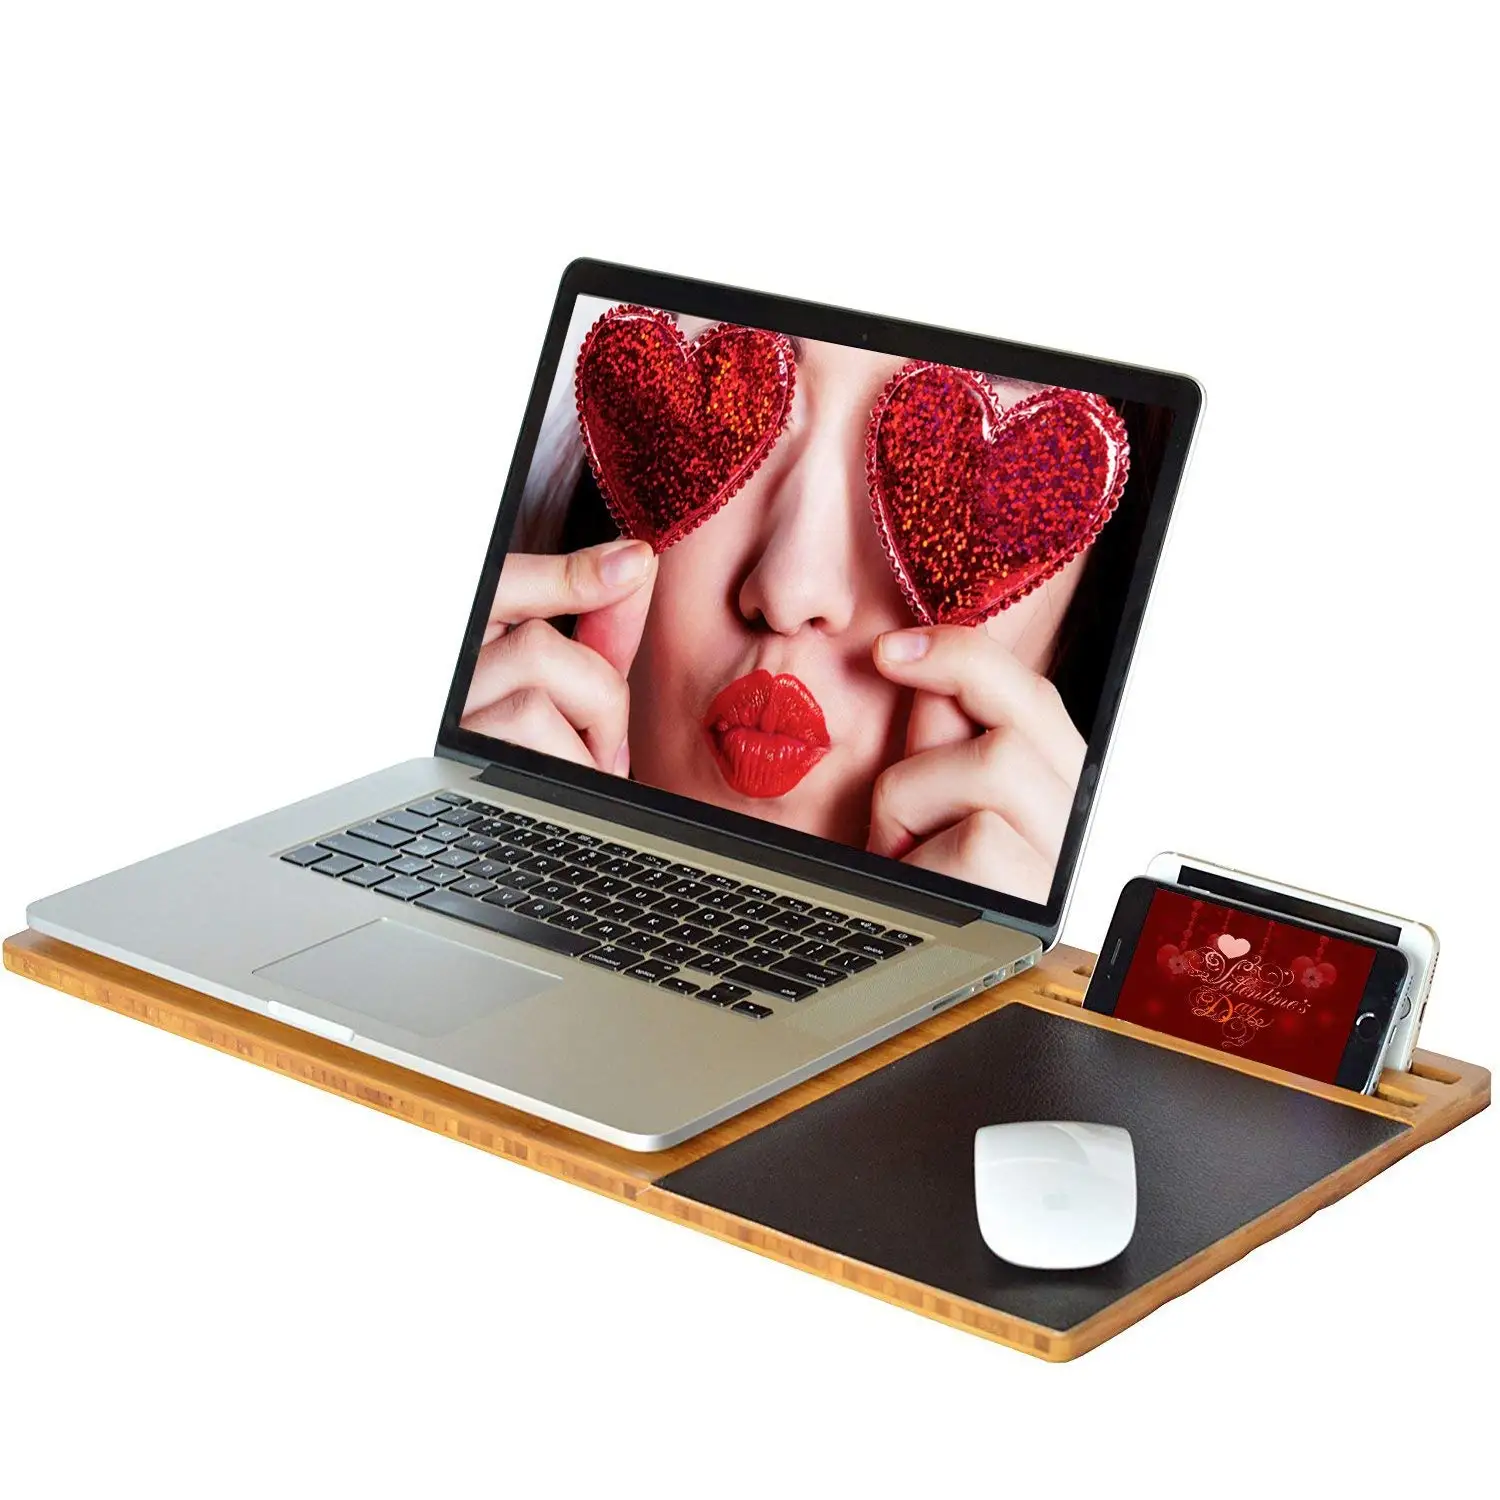 
cushion craft buy wooden study mouse pad cheap bamboo padded kids lap desk laptop lap tray for bed 